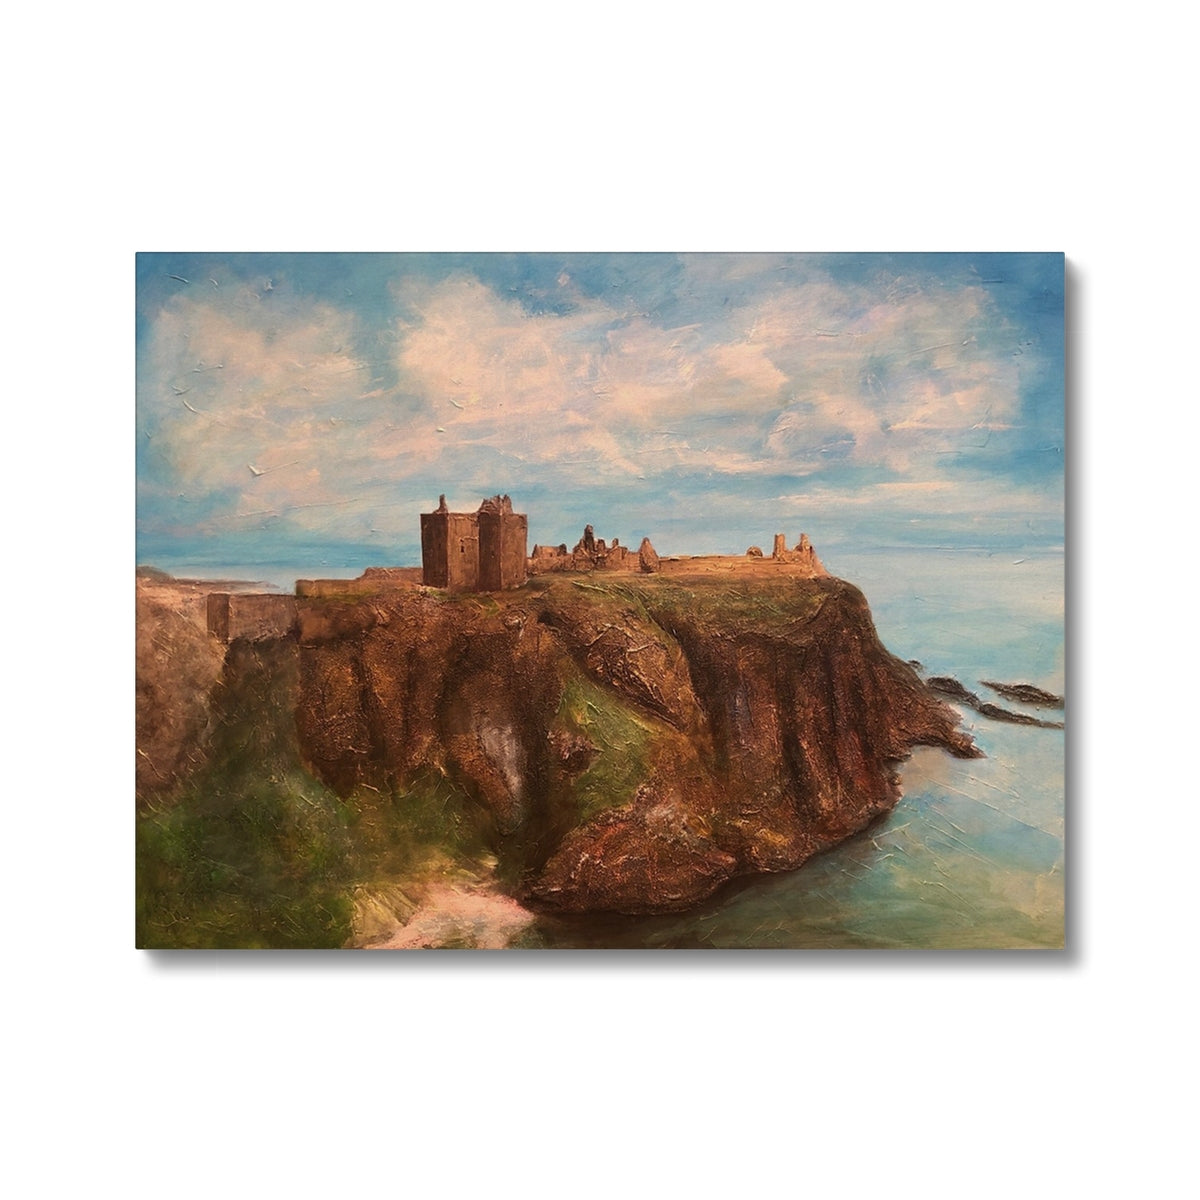 Dunnottar Castle Painting | Canvas From Scotland-Contemporary Stretched Canvas Prints-Historic & Iconic Scotland Art Gallery-24"x18"-Paintings, Prints, Homeware, Art Gifts From Scotland By Scottish Artist Kevin Hunter